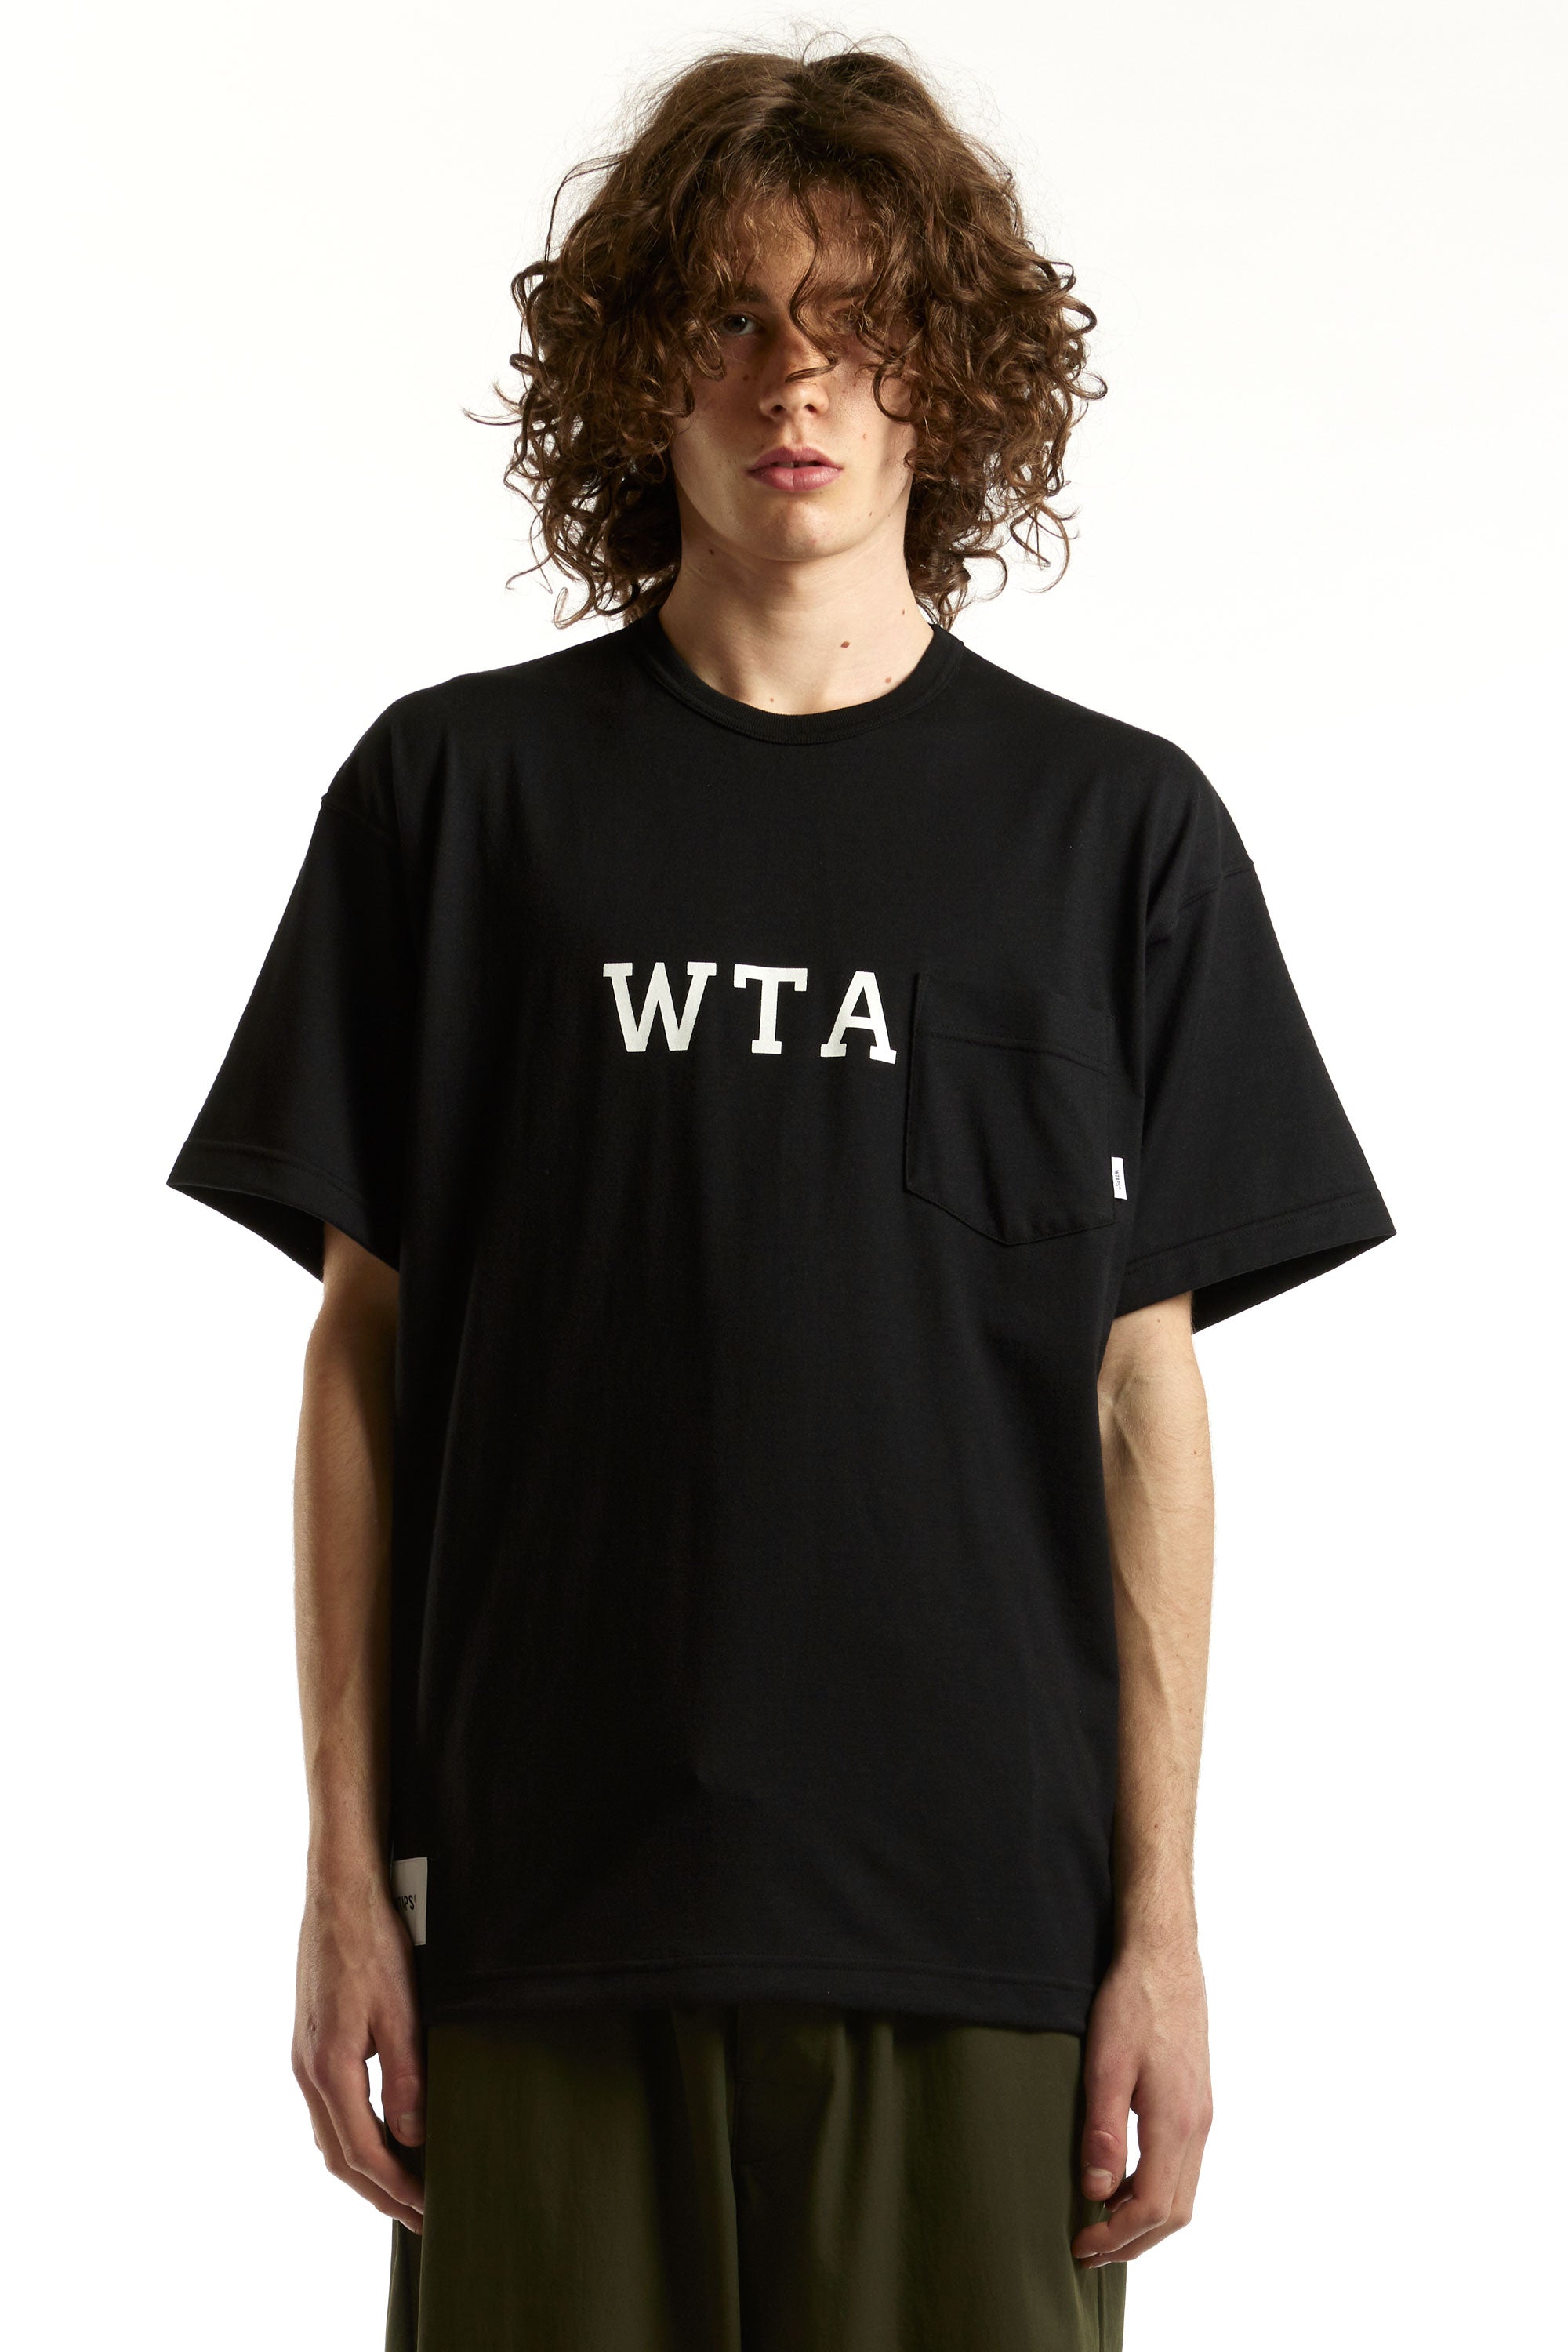 WTAPS Clothing | Shop Online At Perks And Mini – P.A.M. (Perks And